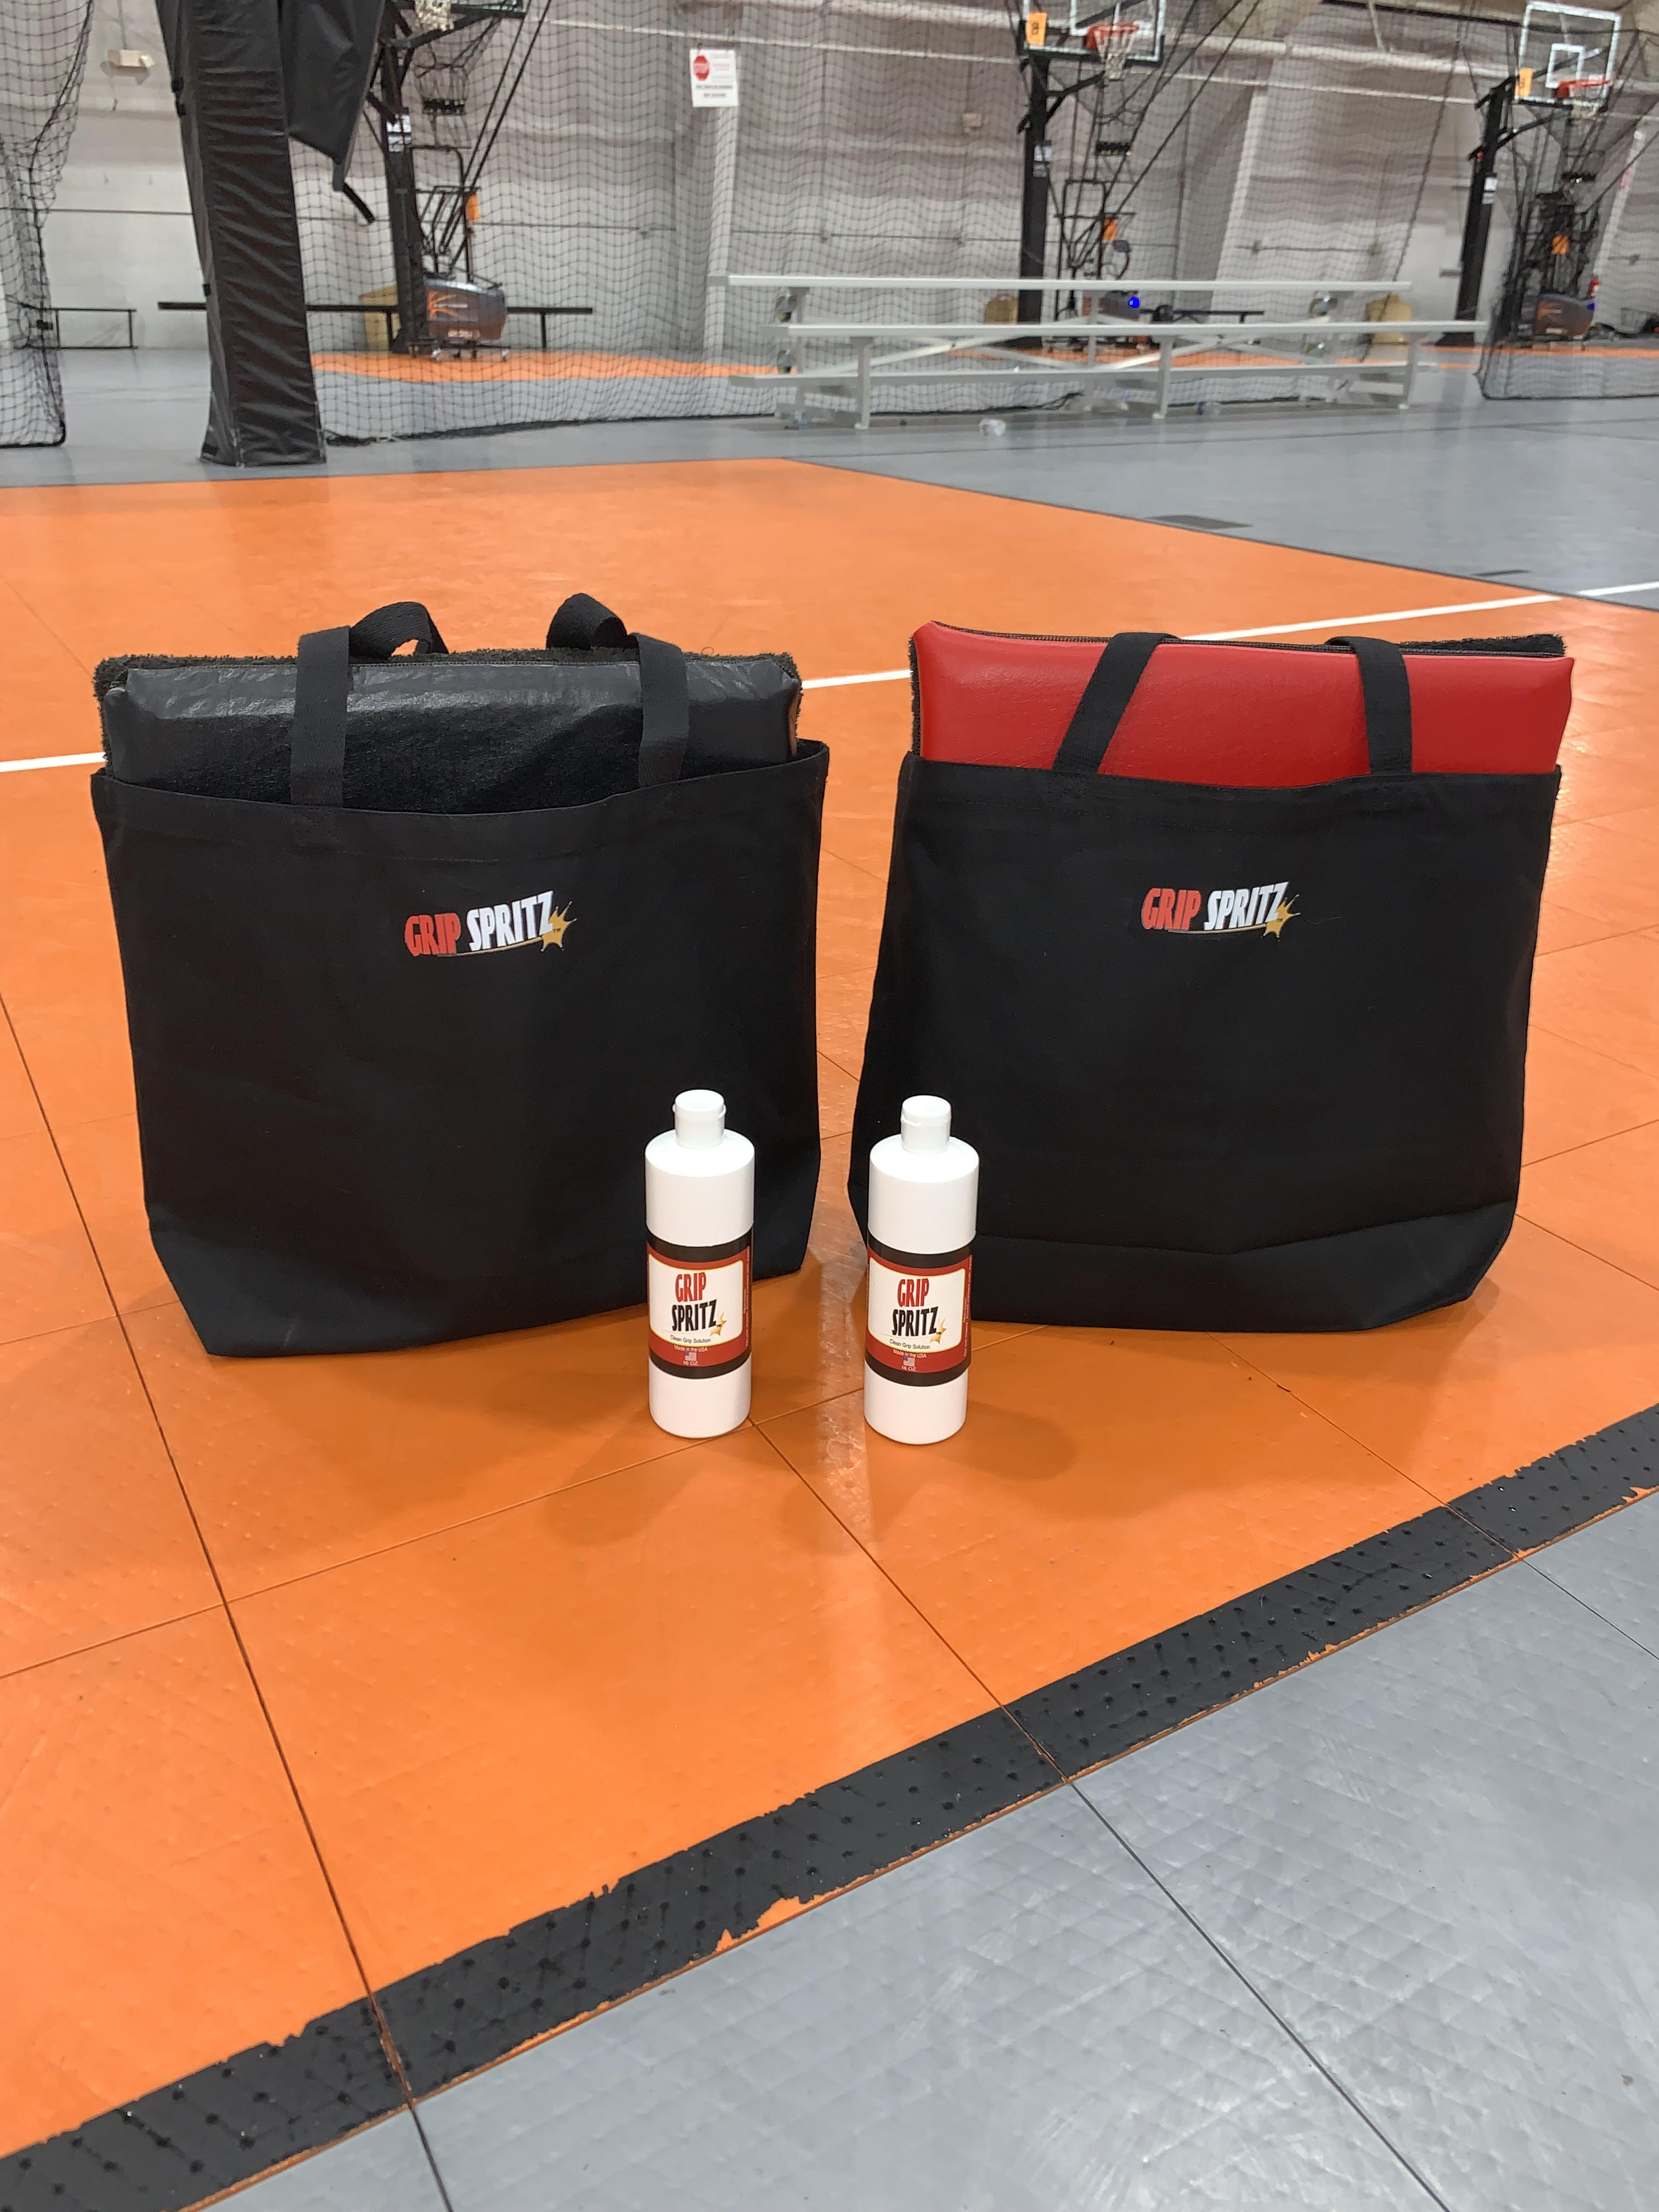 2 Grip Spritz Courtside Basketball Traction Mats in tote bags